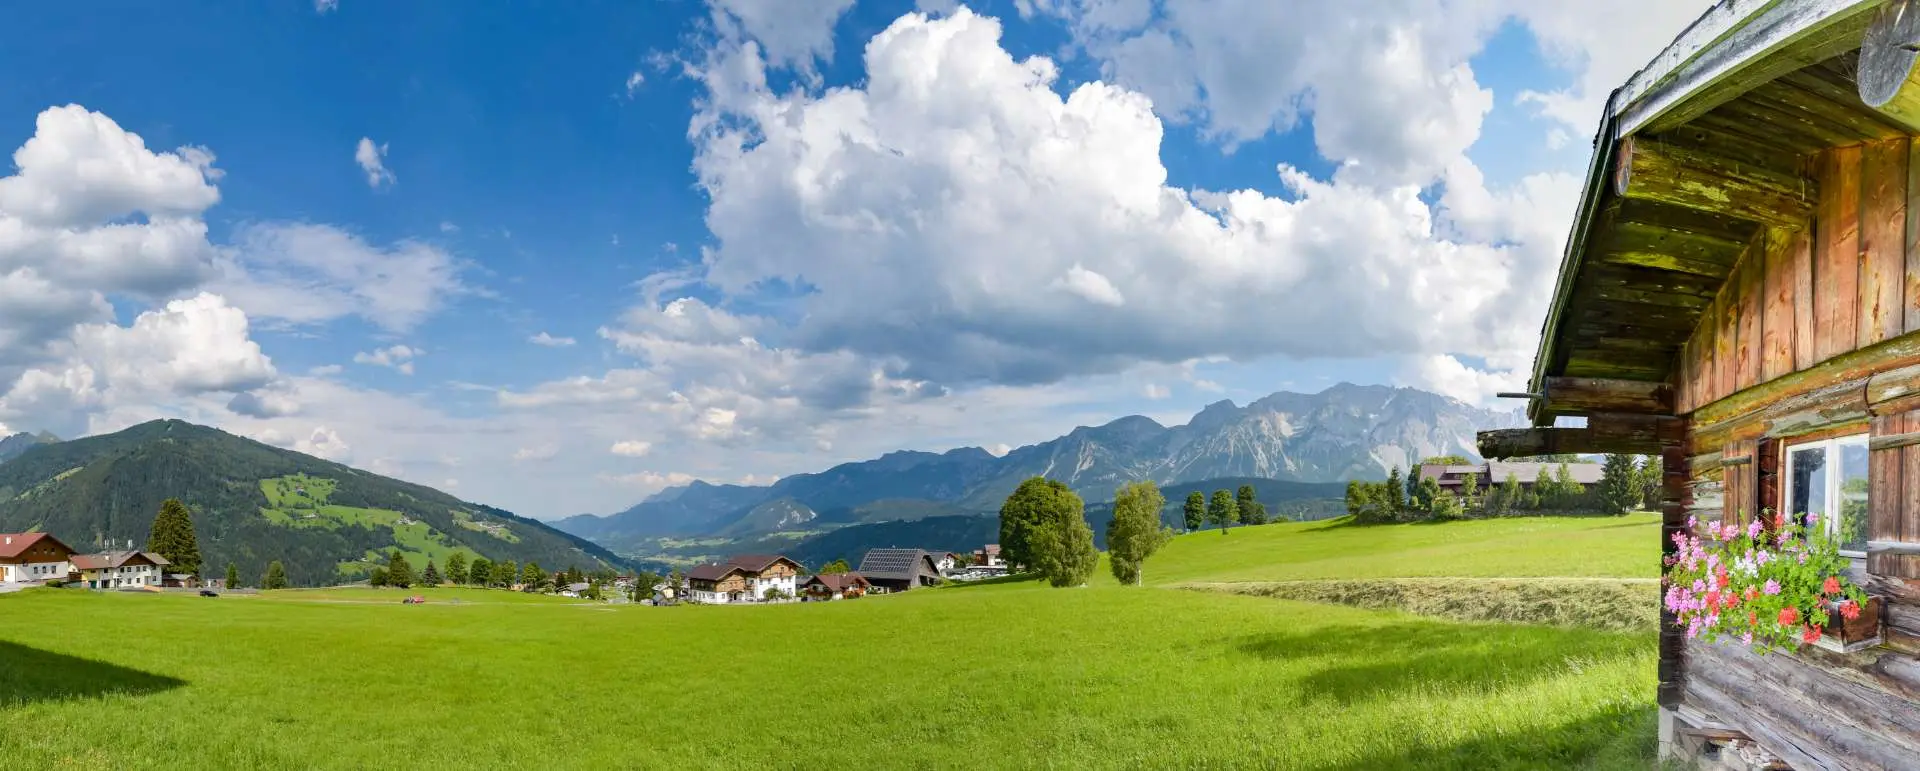 Styria - the destination for group hotels with parking spaces